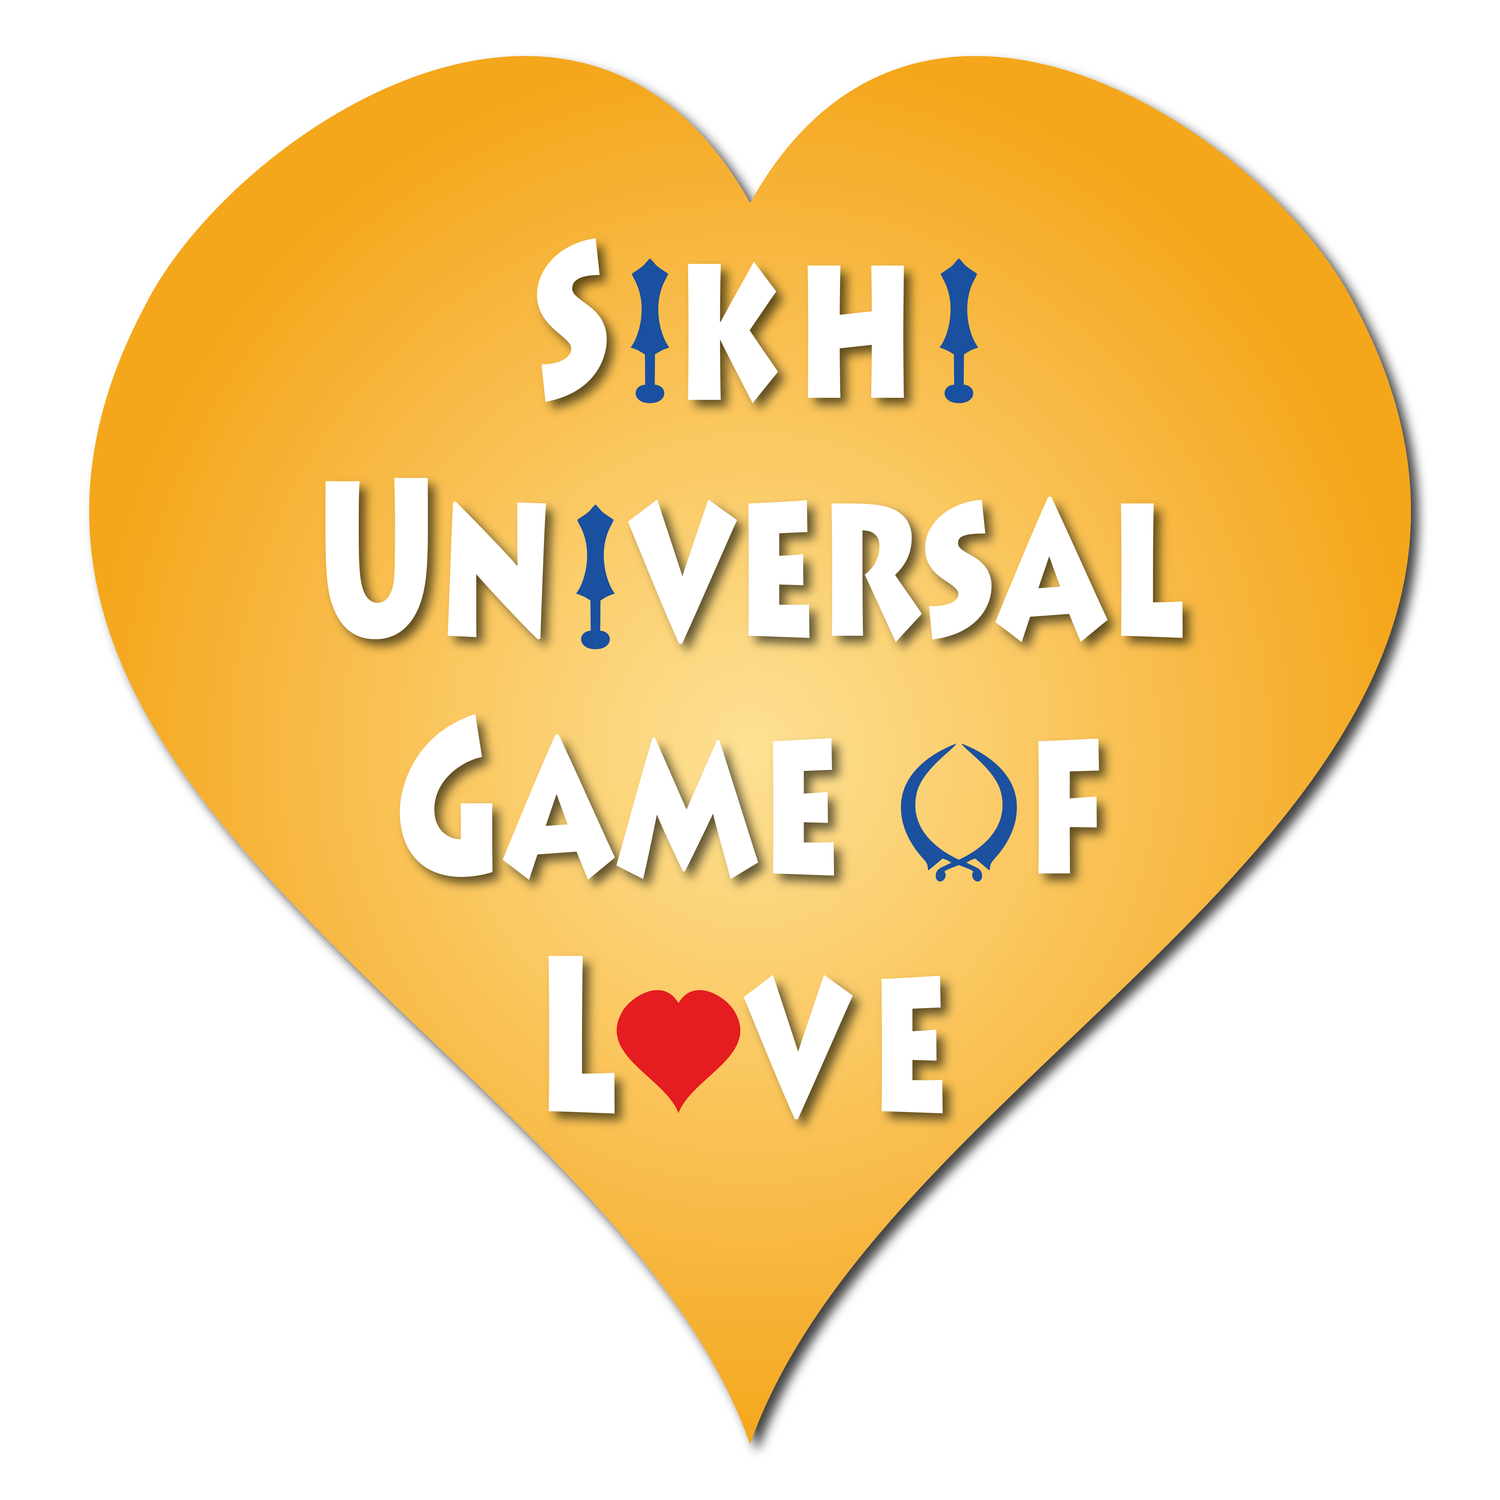 game-of-love-240-the-universe-lies-within-sikhi-universal-game-of-love